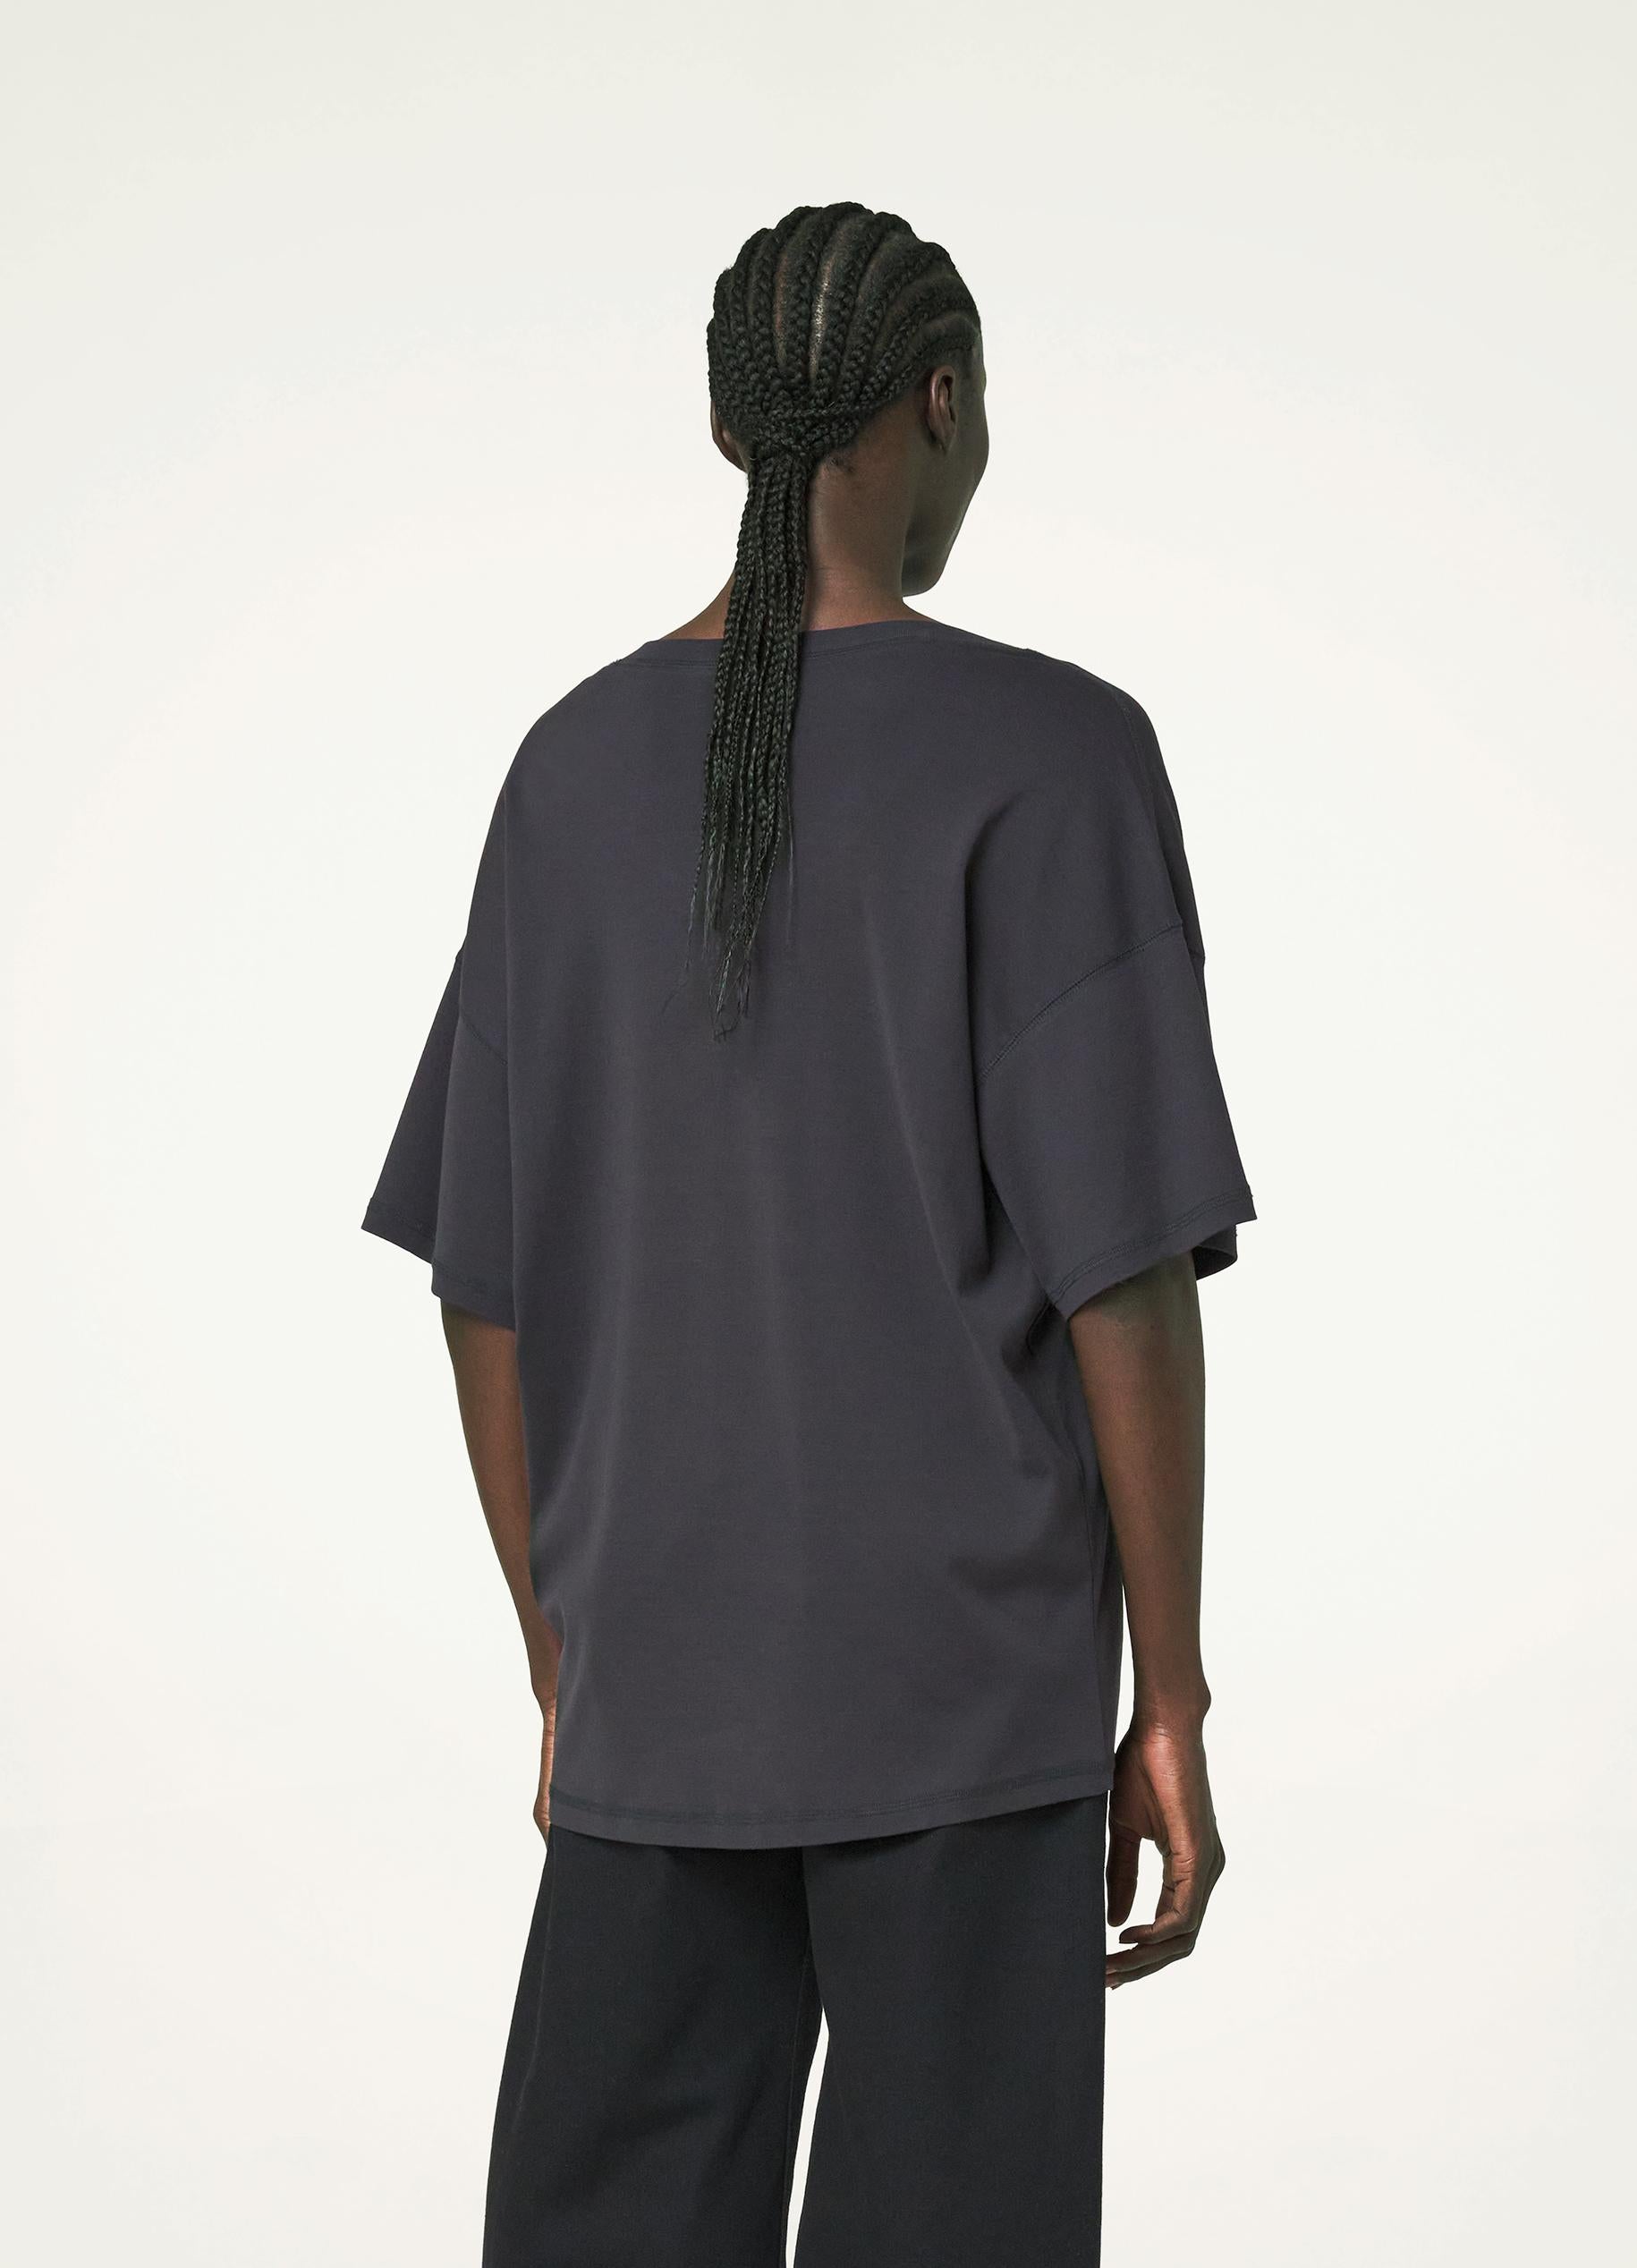 Squid Ink Rib T-Shirt in Rib Jersey | LEMAIRE